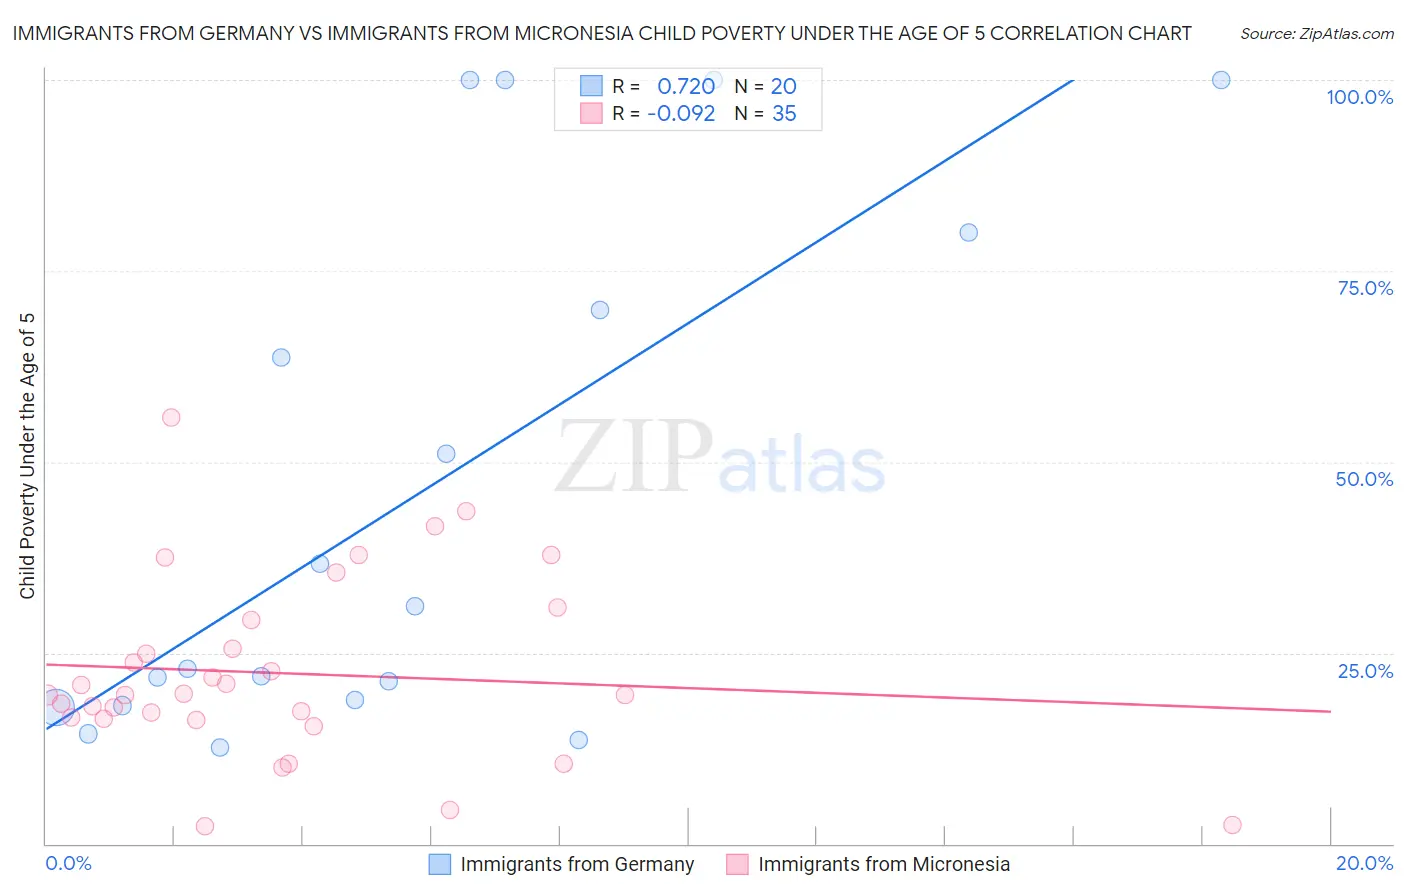 Immigrants from Germany vs Immigrants from Micronesia Child Poverty Under the Age of 5